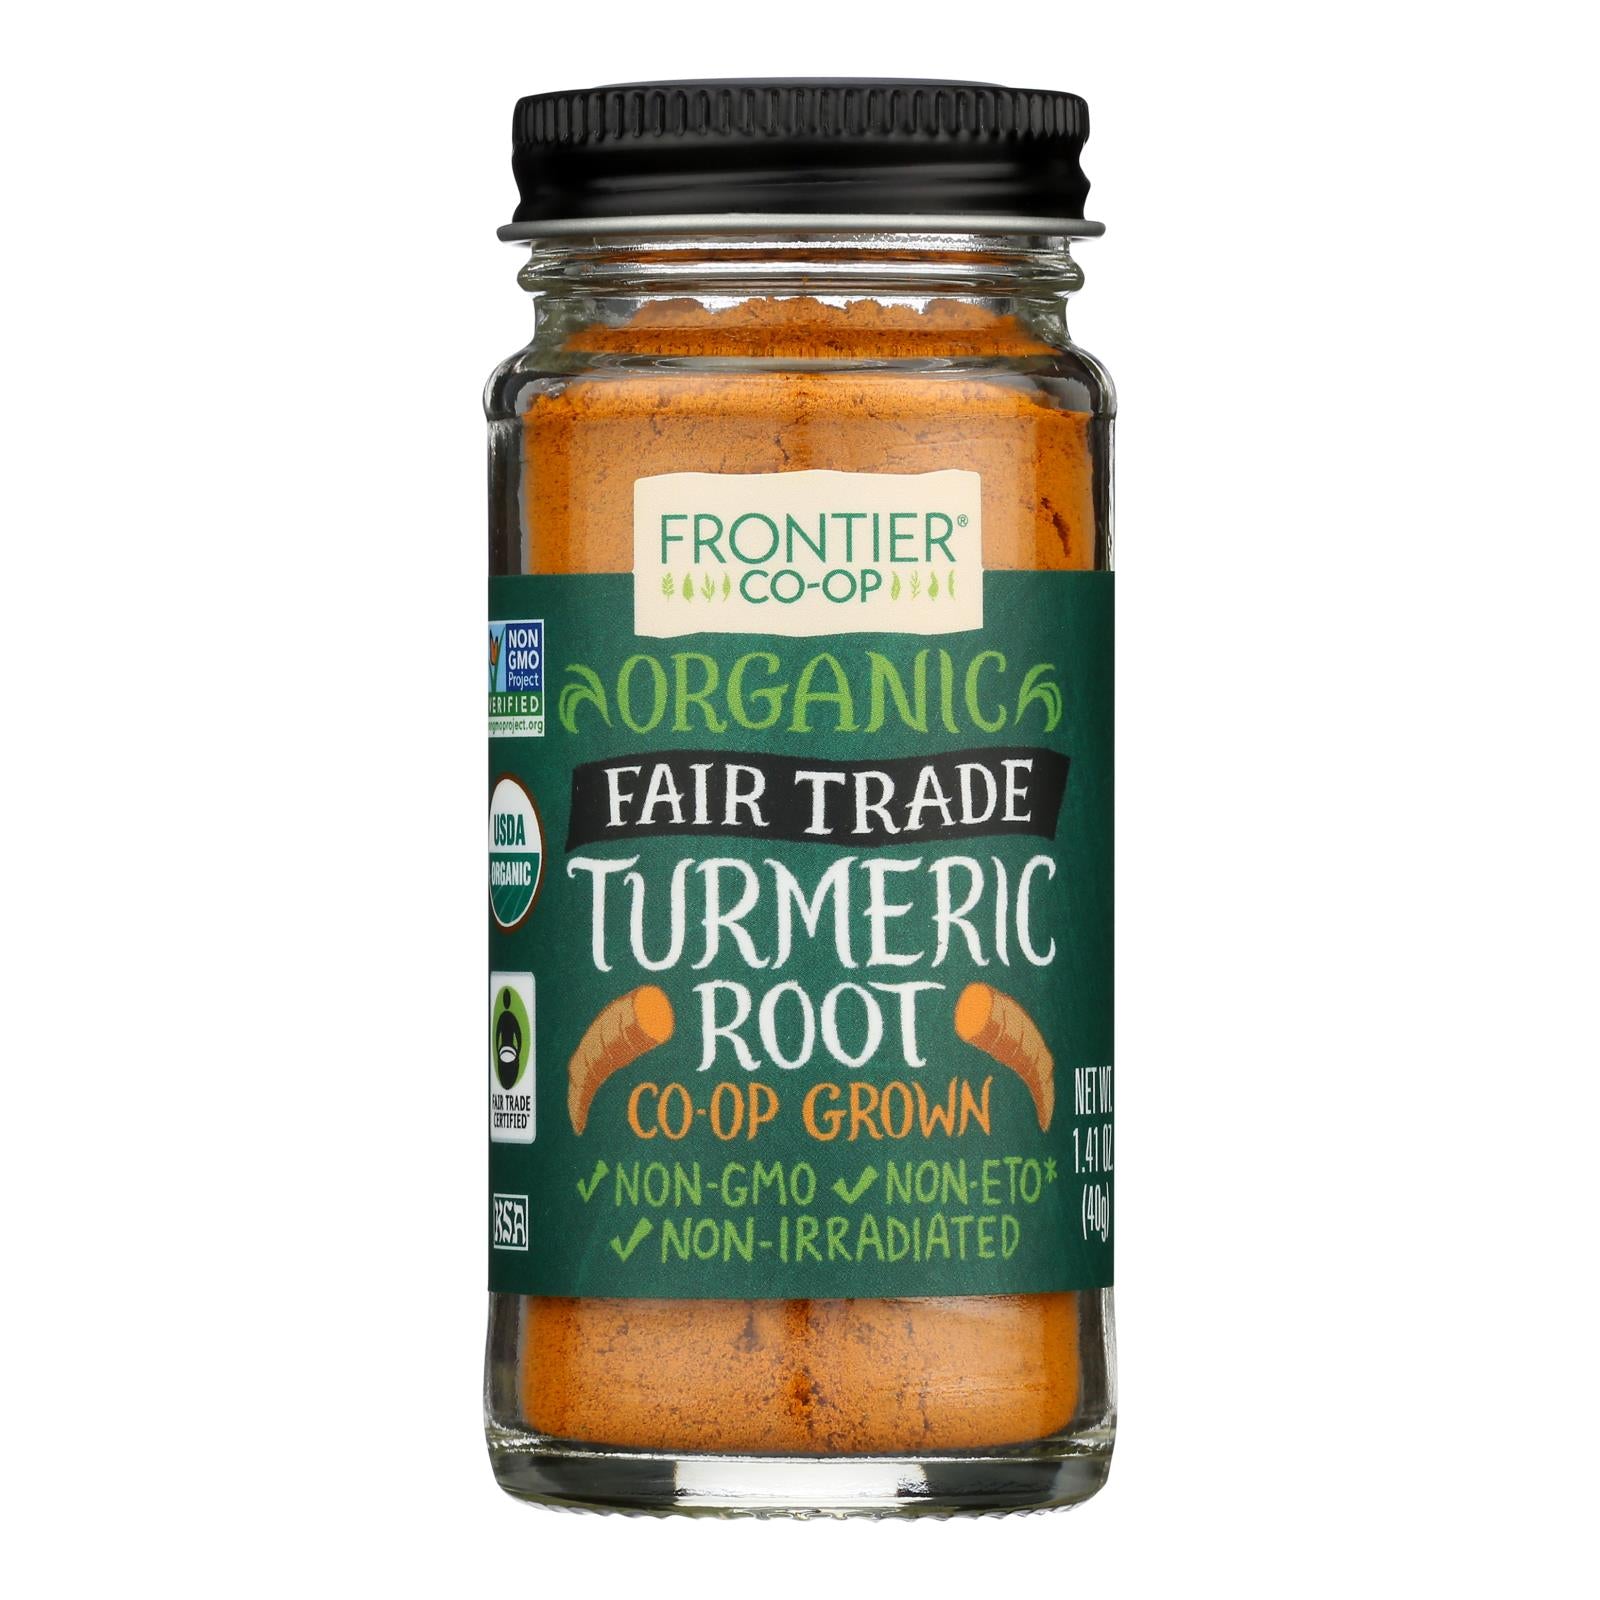 Frontier Herb Turmeric Root - Organic - Fair Trade Certified - Ground - 1.41 Oz